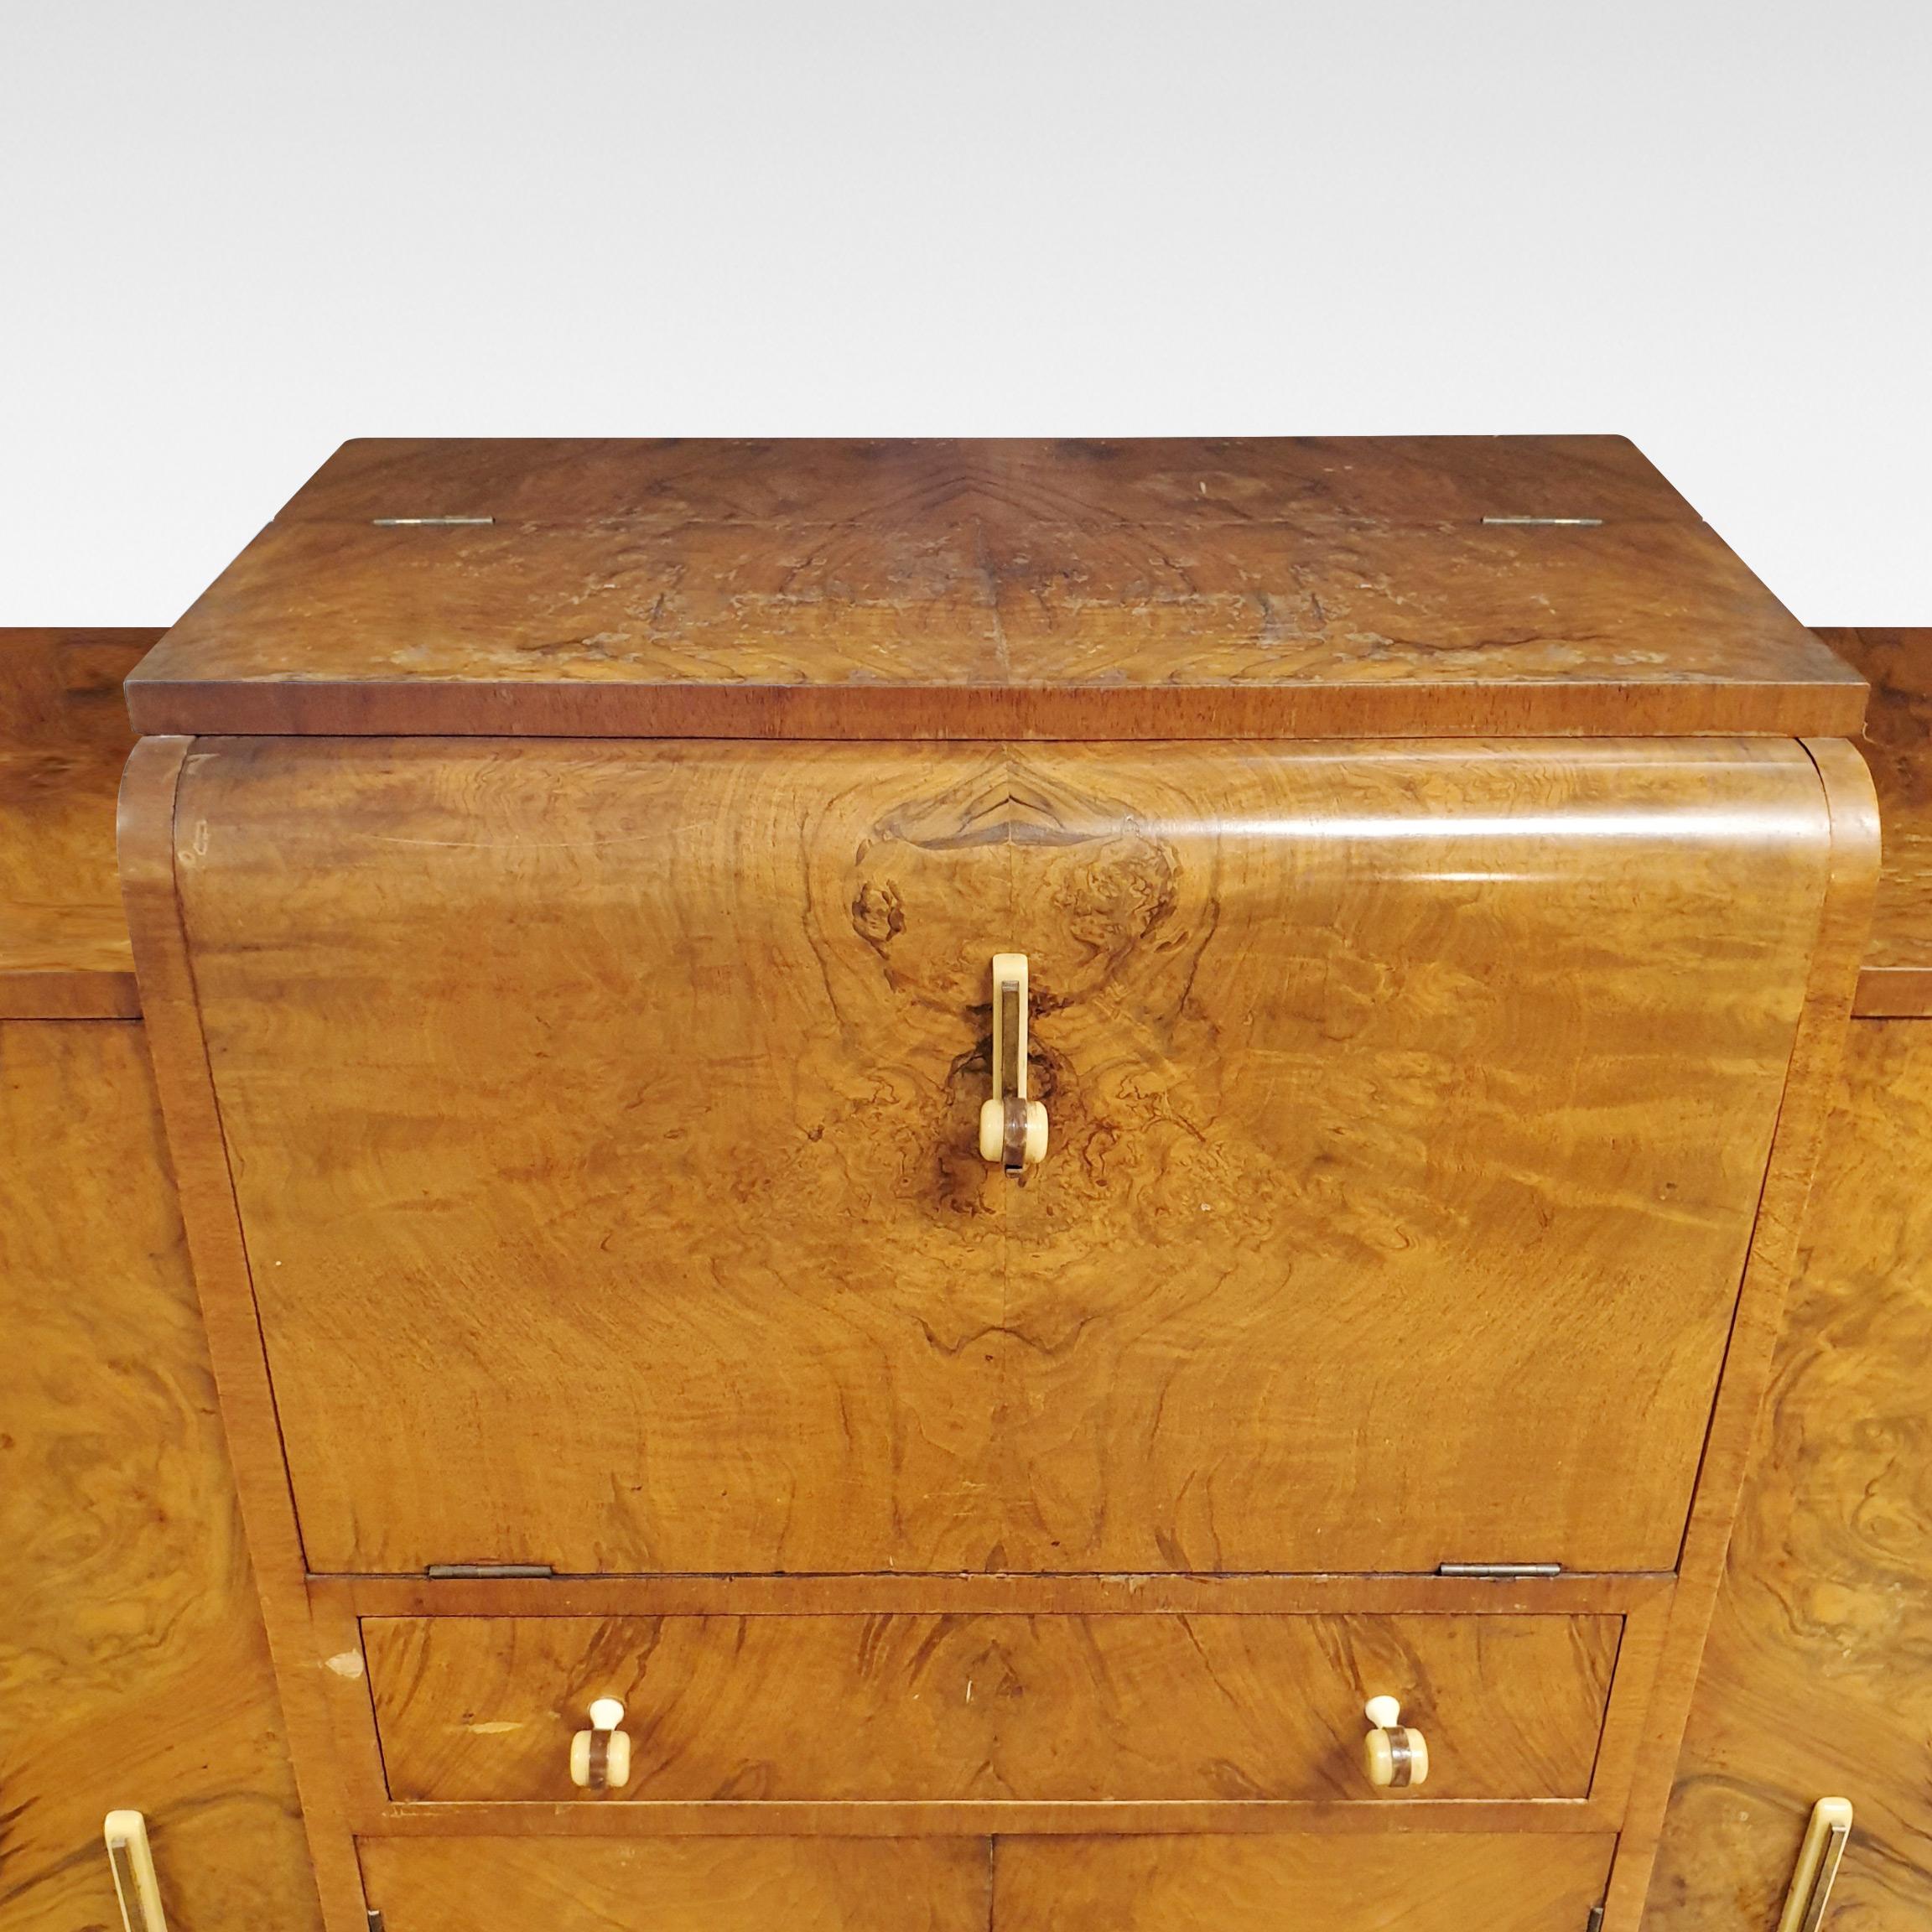 With all the hallmarks of Epstein the first tier English Art Deco furniture makers, this cocktail sideboard in attractive figured walnut veneers has a drop down front opening to reveal a fully fitted interior, circa 1935-1955

The price includes